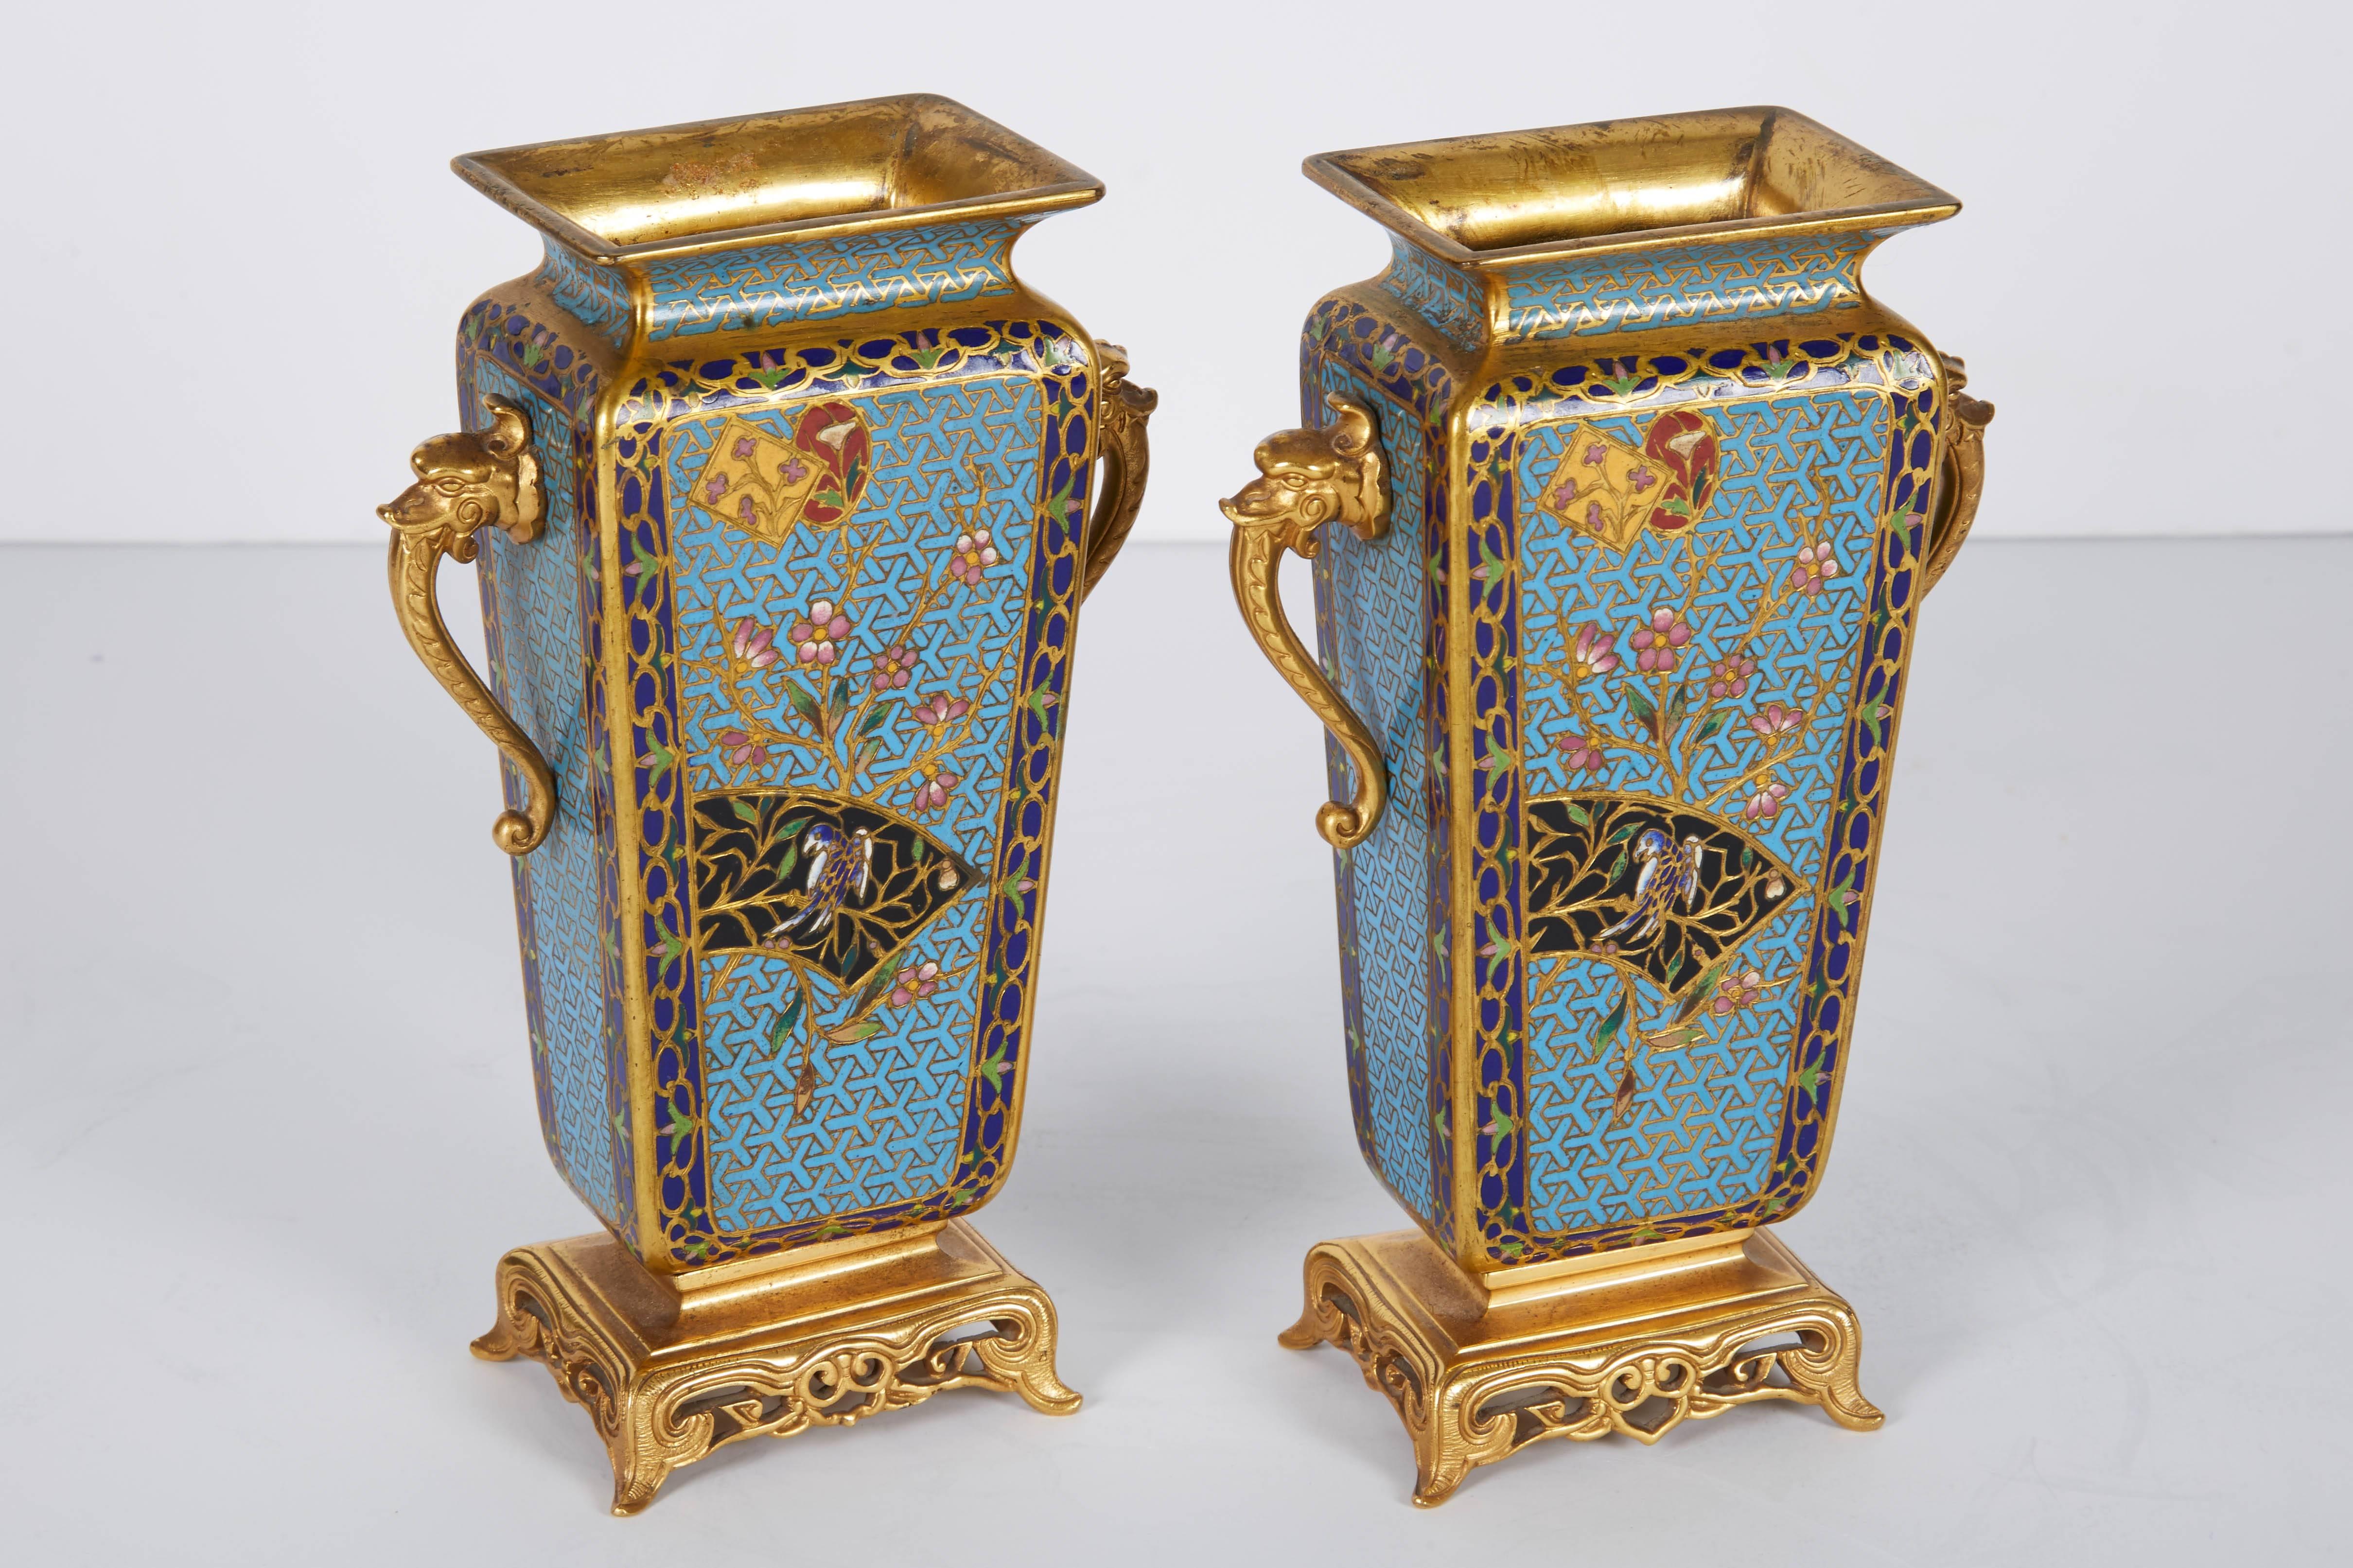 A magnificent pair of French ormolu bronze and champleve´ cloisonne´ enamel vases. 

19th century.

7.5